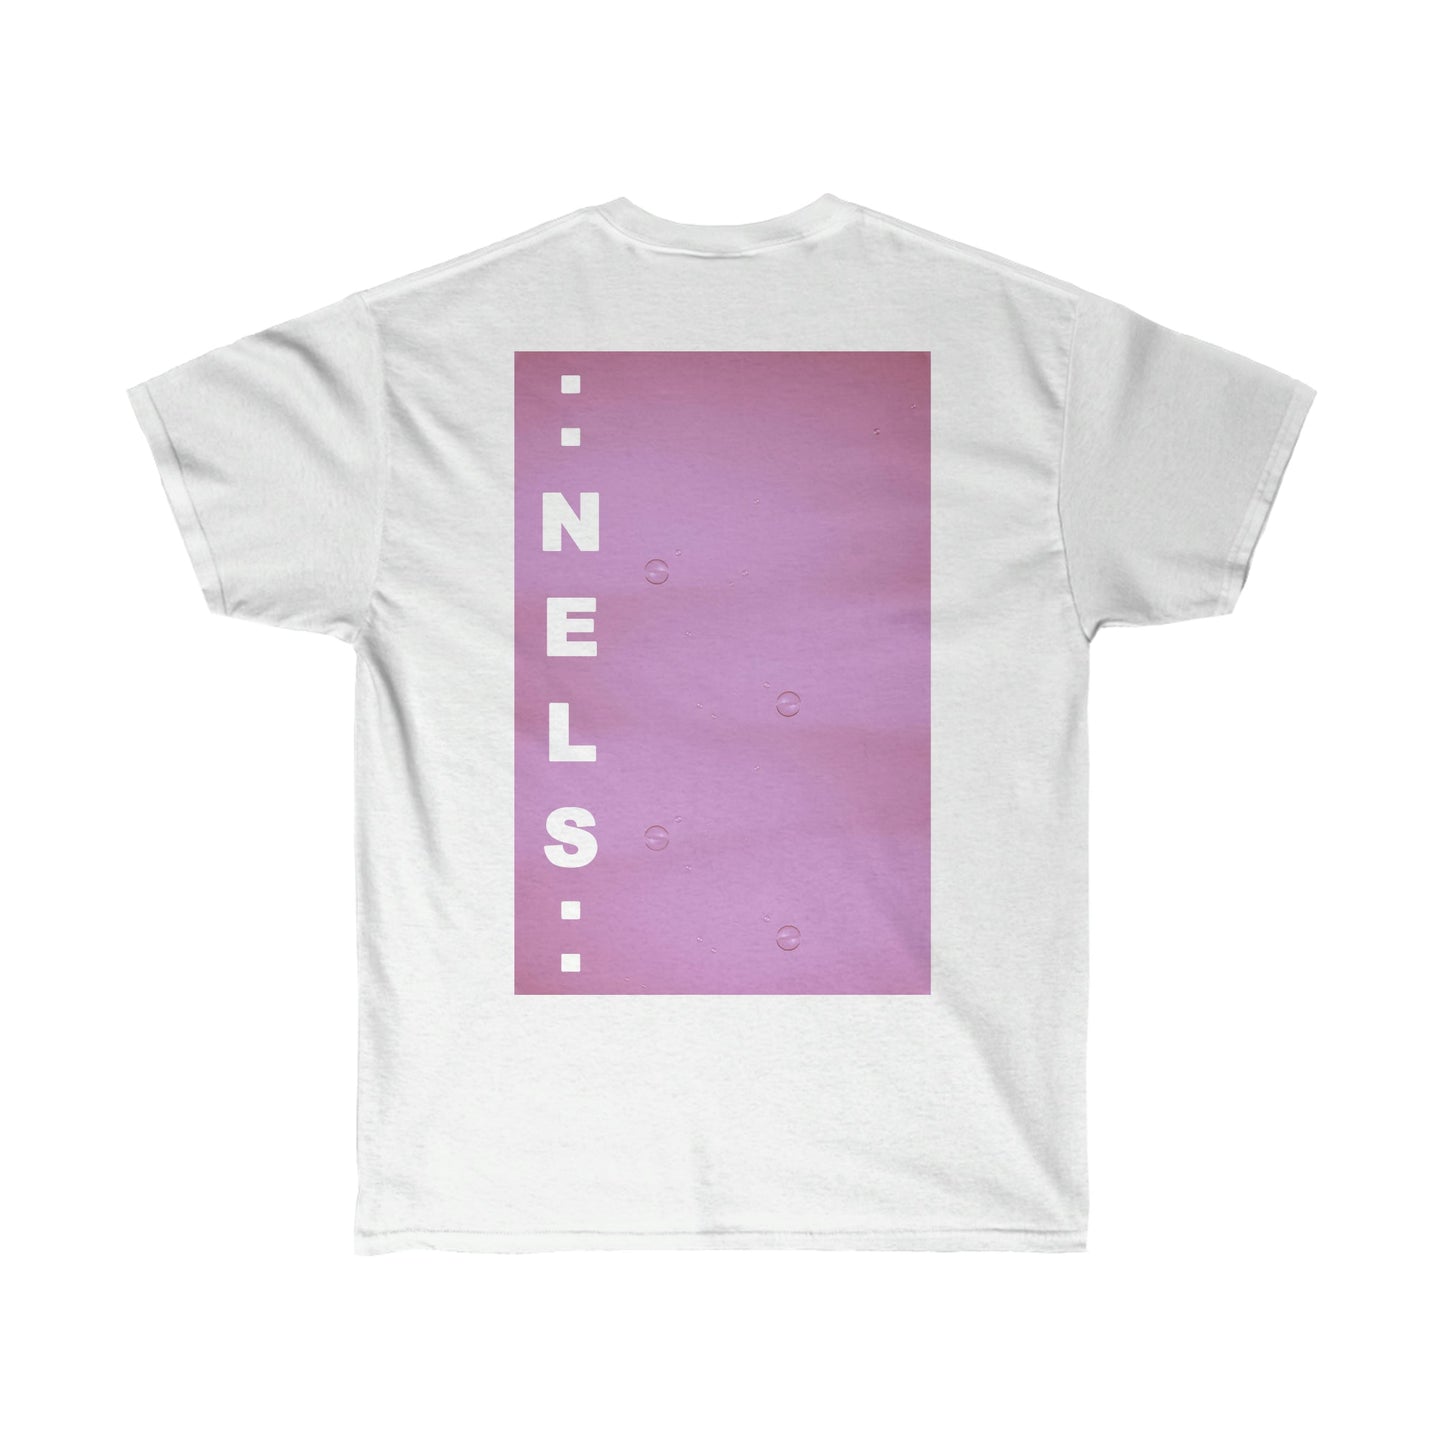 Tee NELS. & Pink Bubbles Front and Back - NELS.